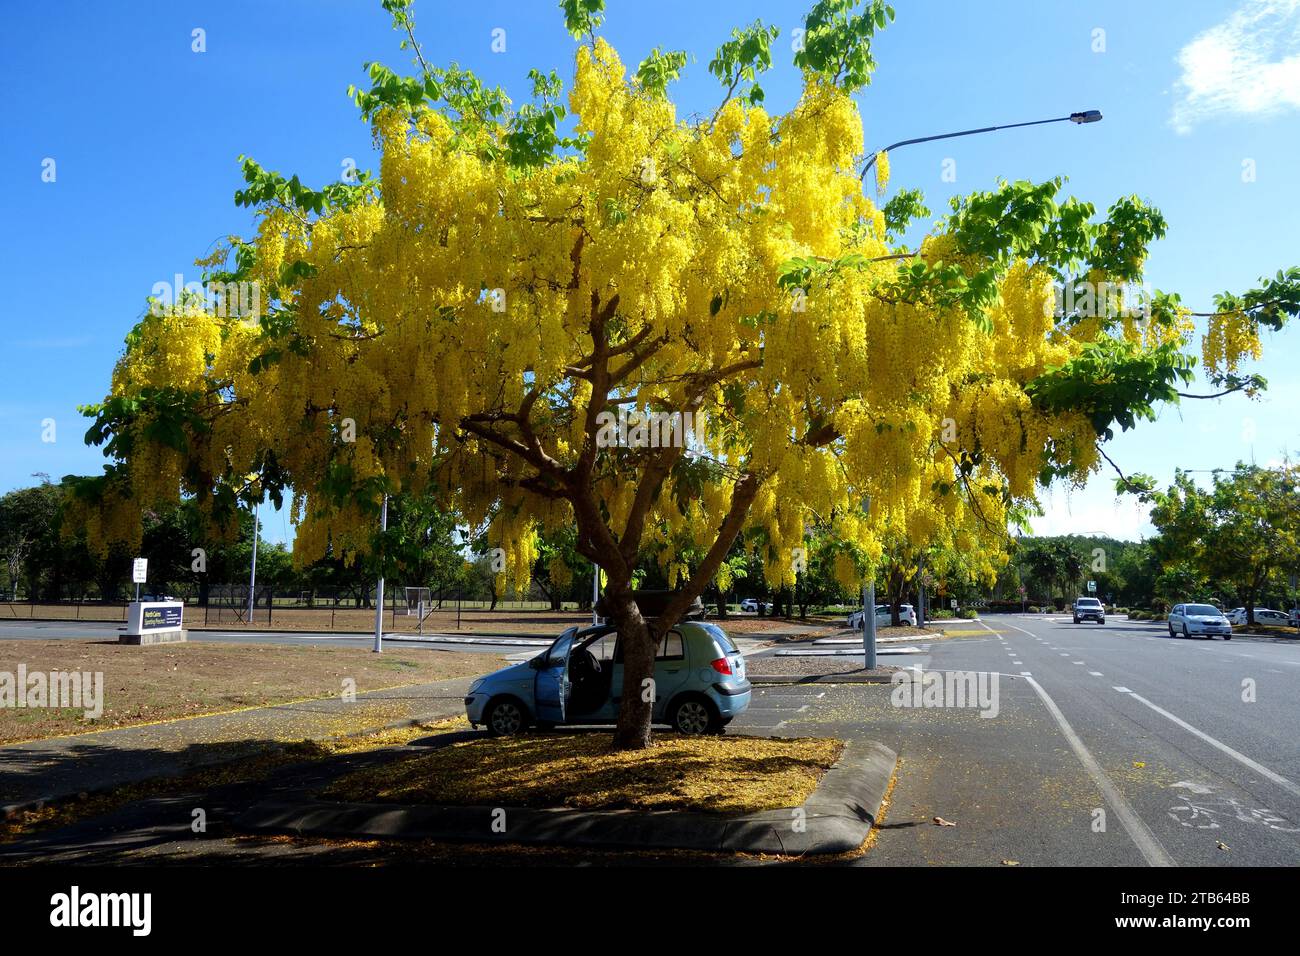 Golden chain tree (Laburnum anagyroides) in full bloom, Lily Street, Cairns, Queensland, Australia Stock Photo